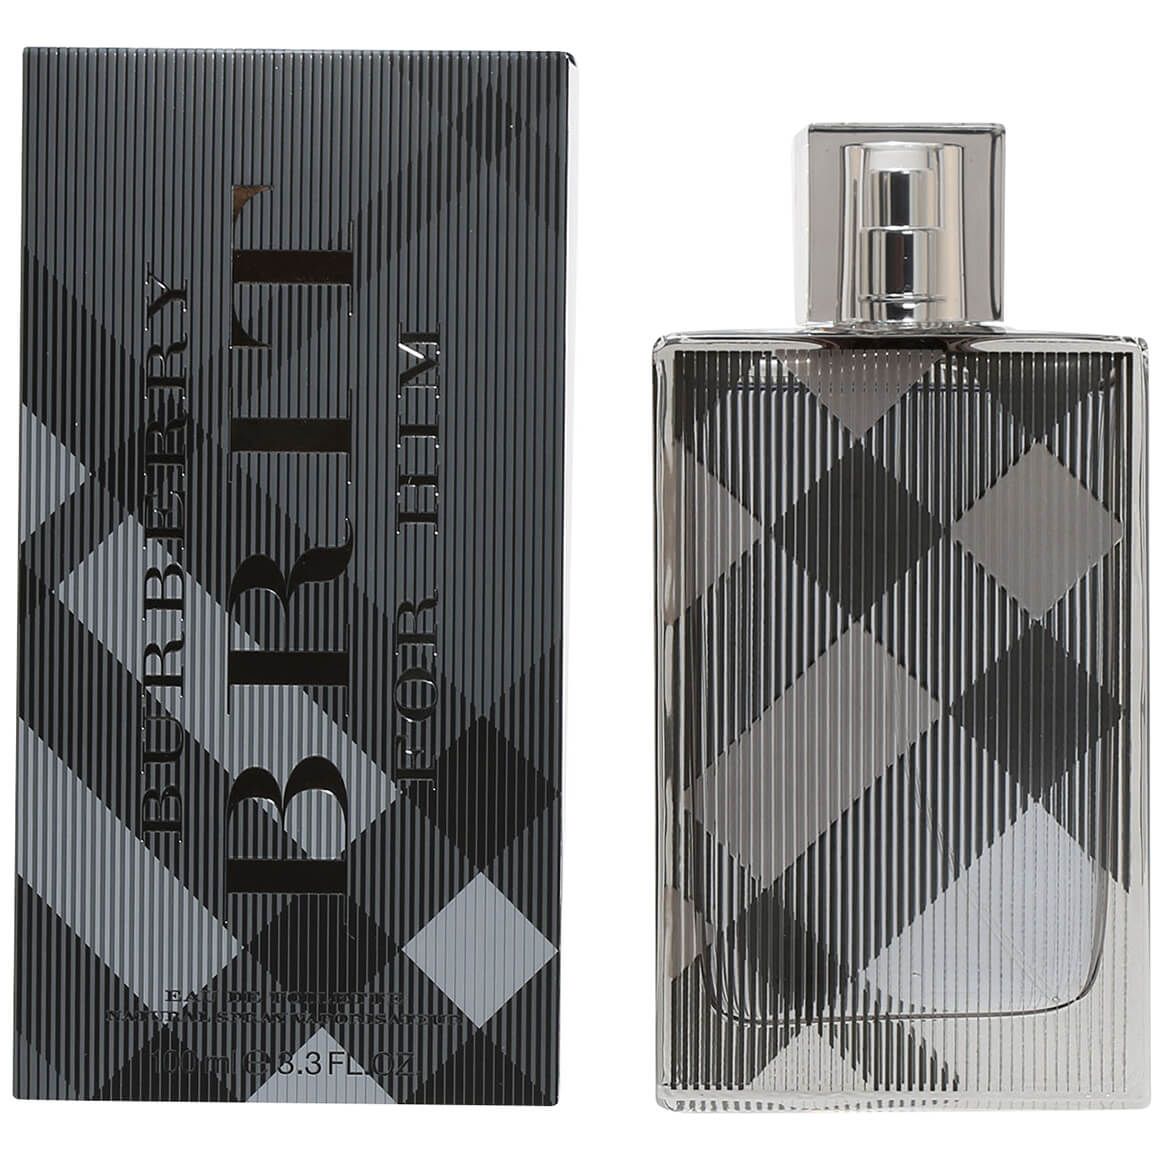 Burberry Brit by Burberry for Men EDT, 3.3 oz. + '-' + 373143